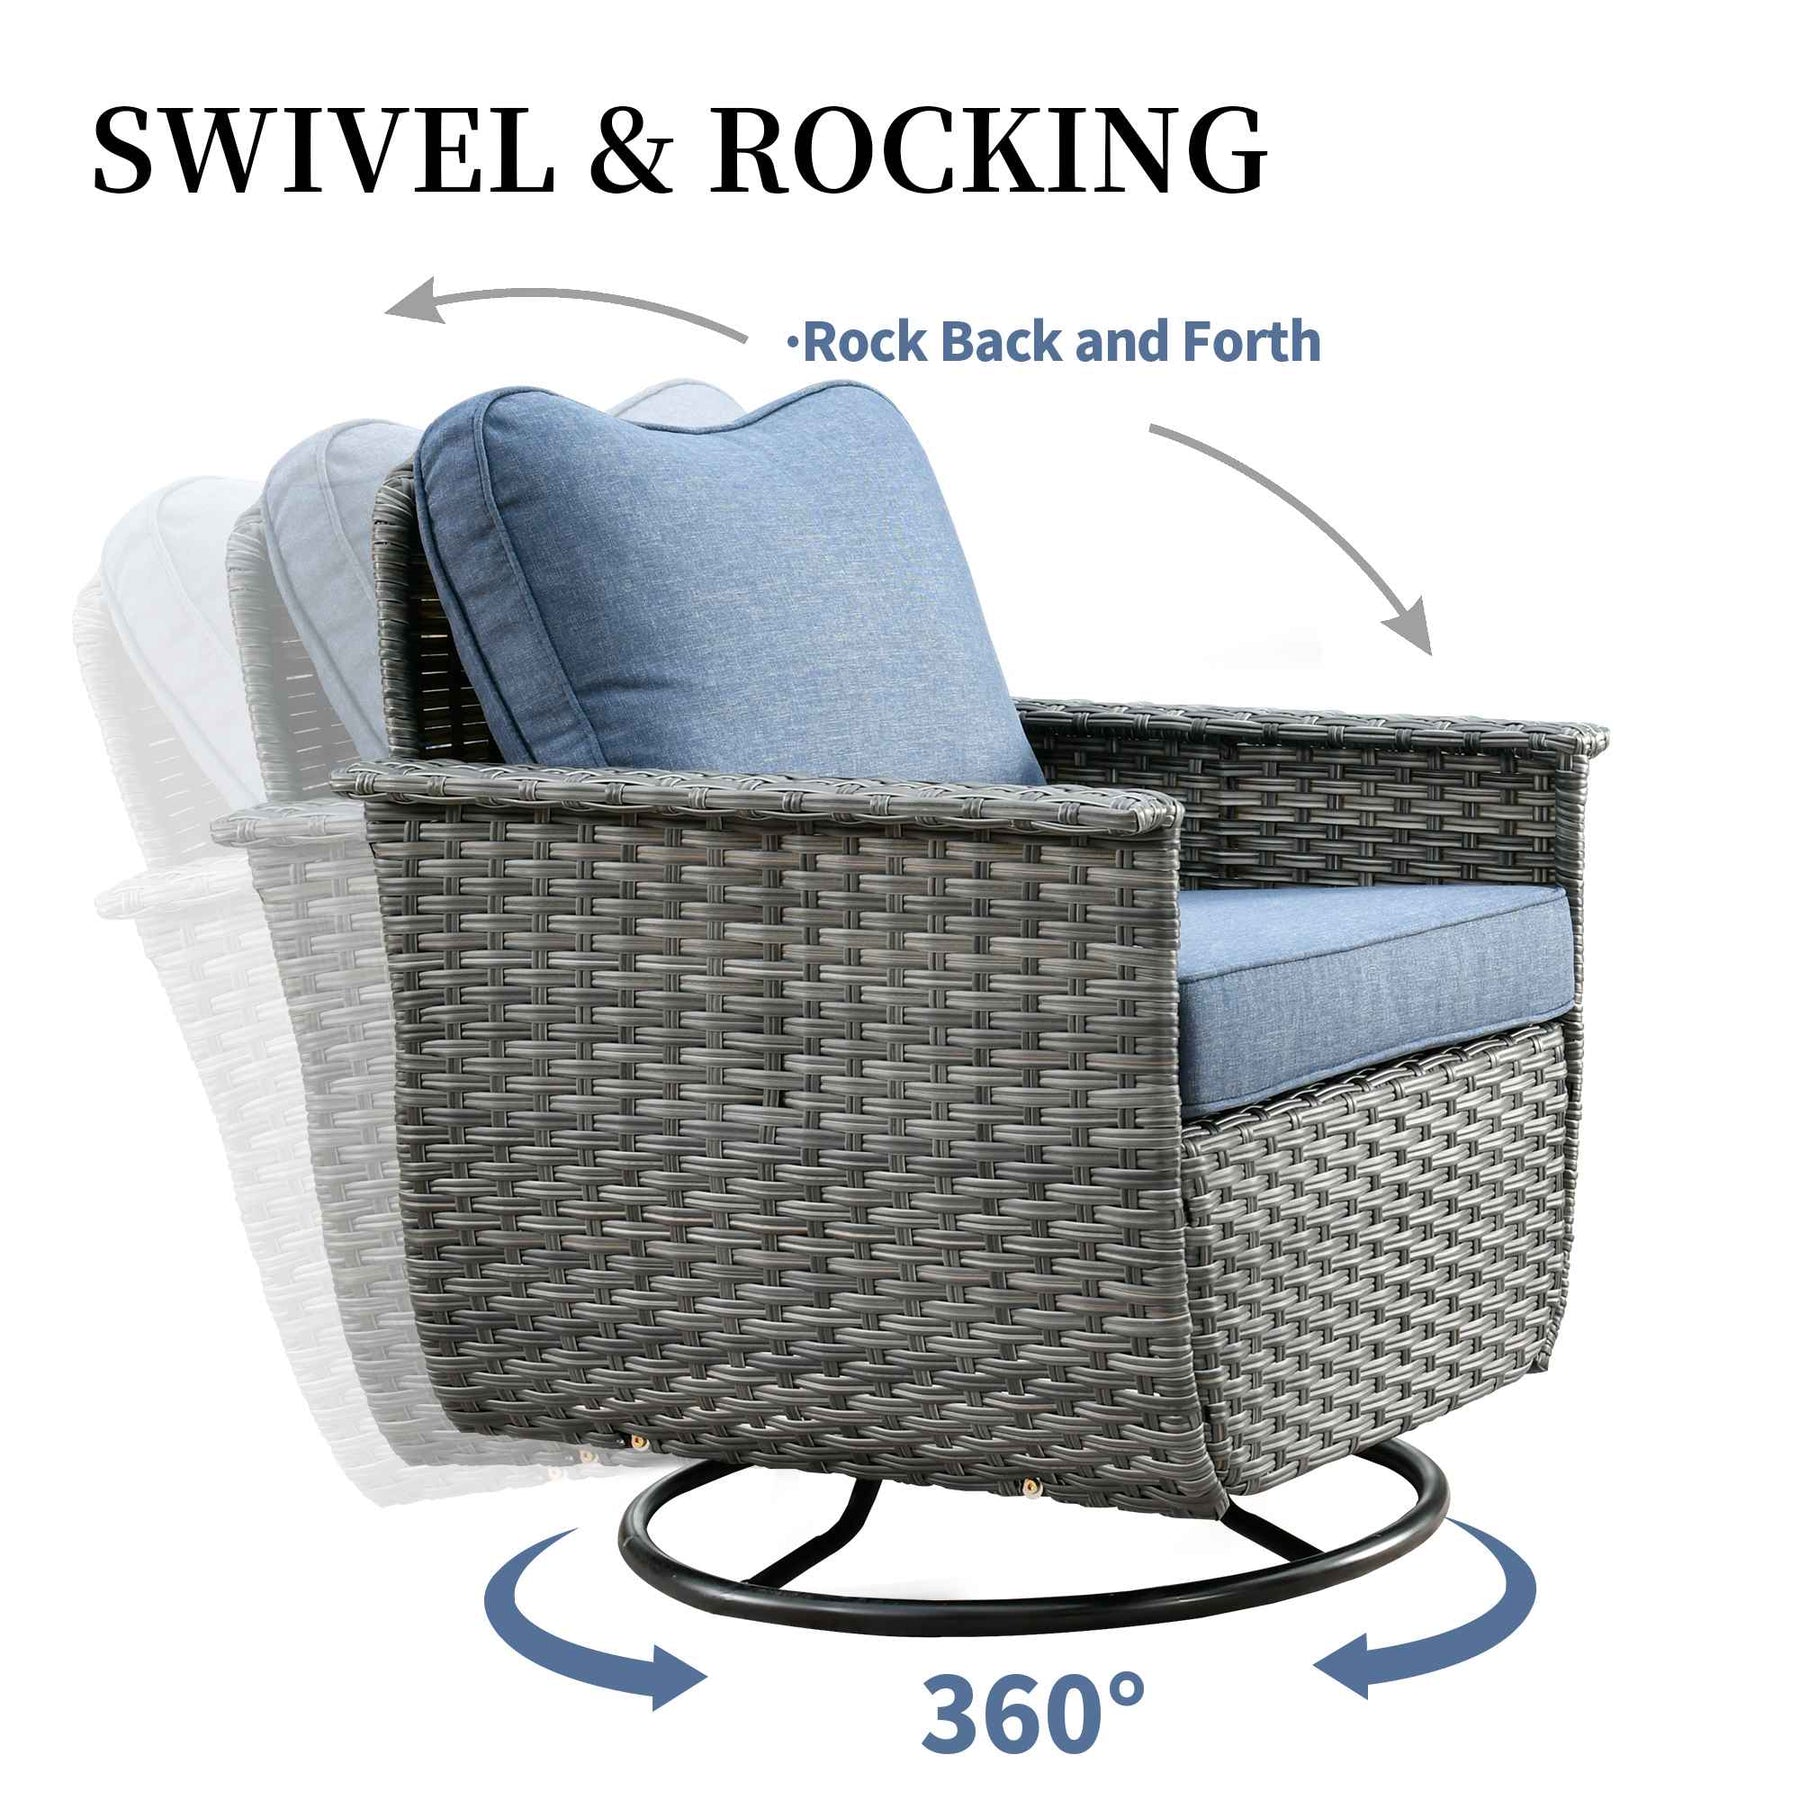 Ovios Rocking Chair Dark Grey Wicker Outdoor Table and Chairs matching Pet Sofa Series